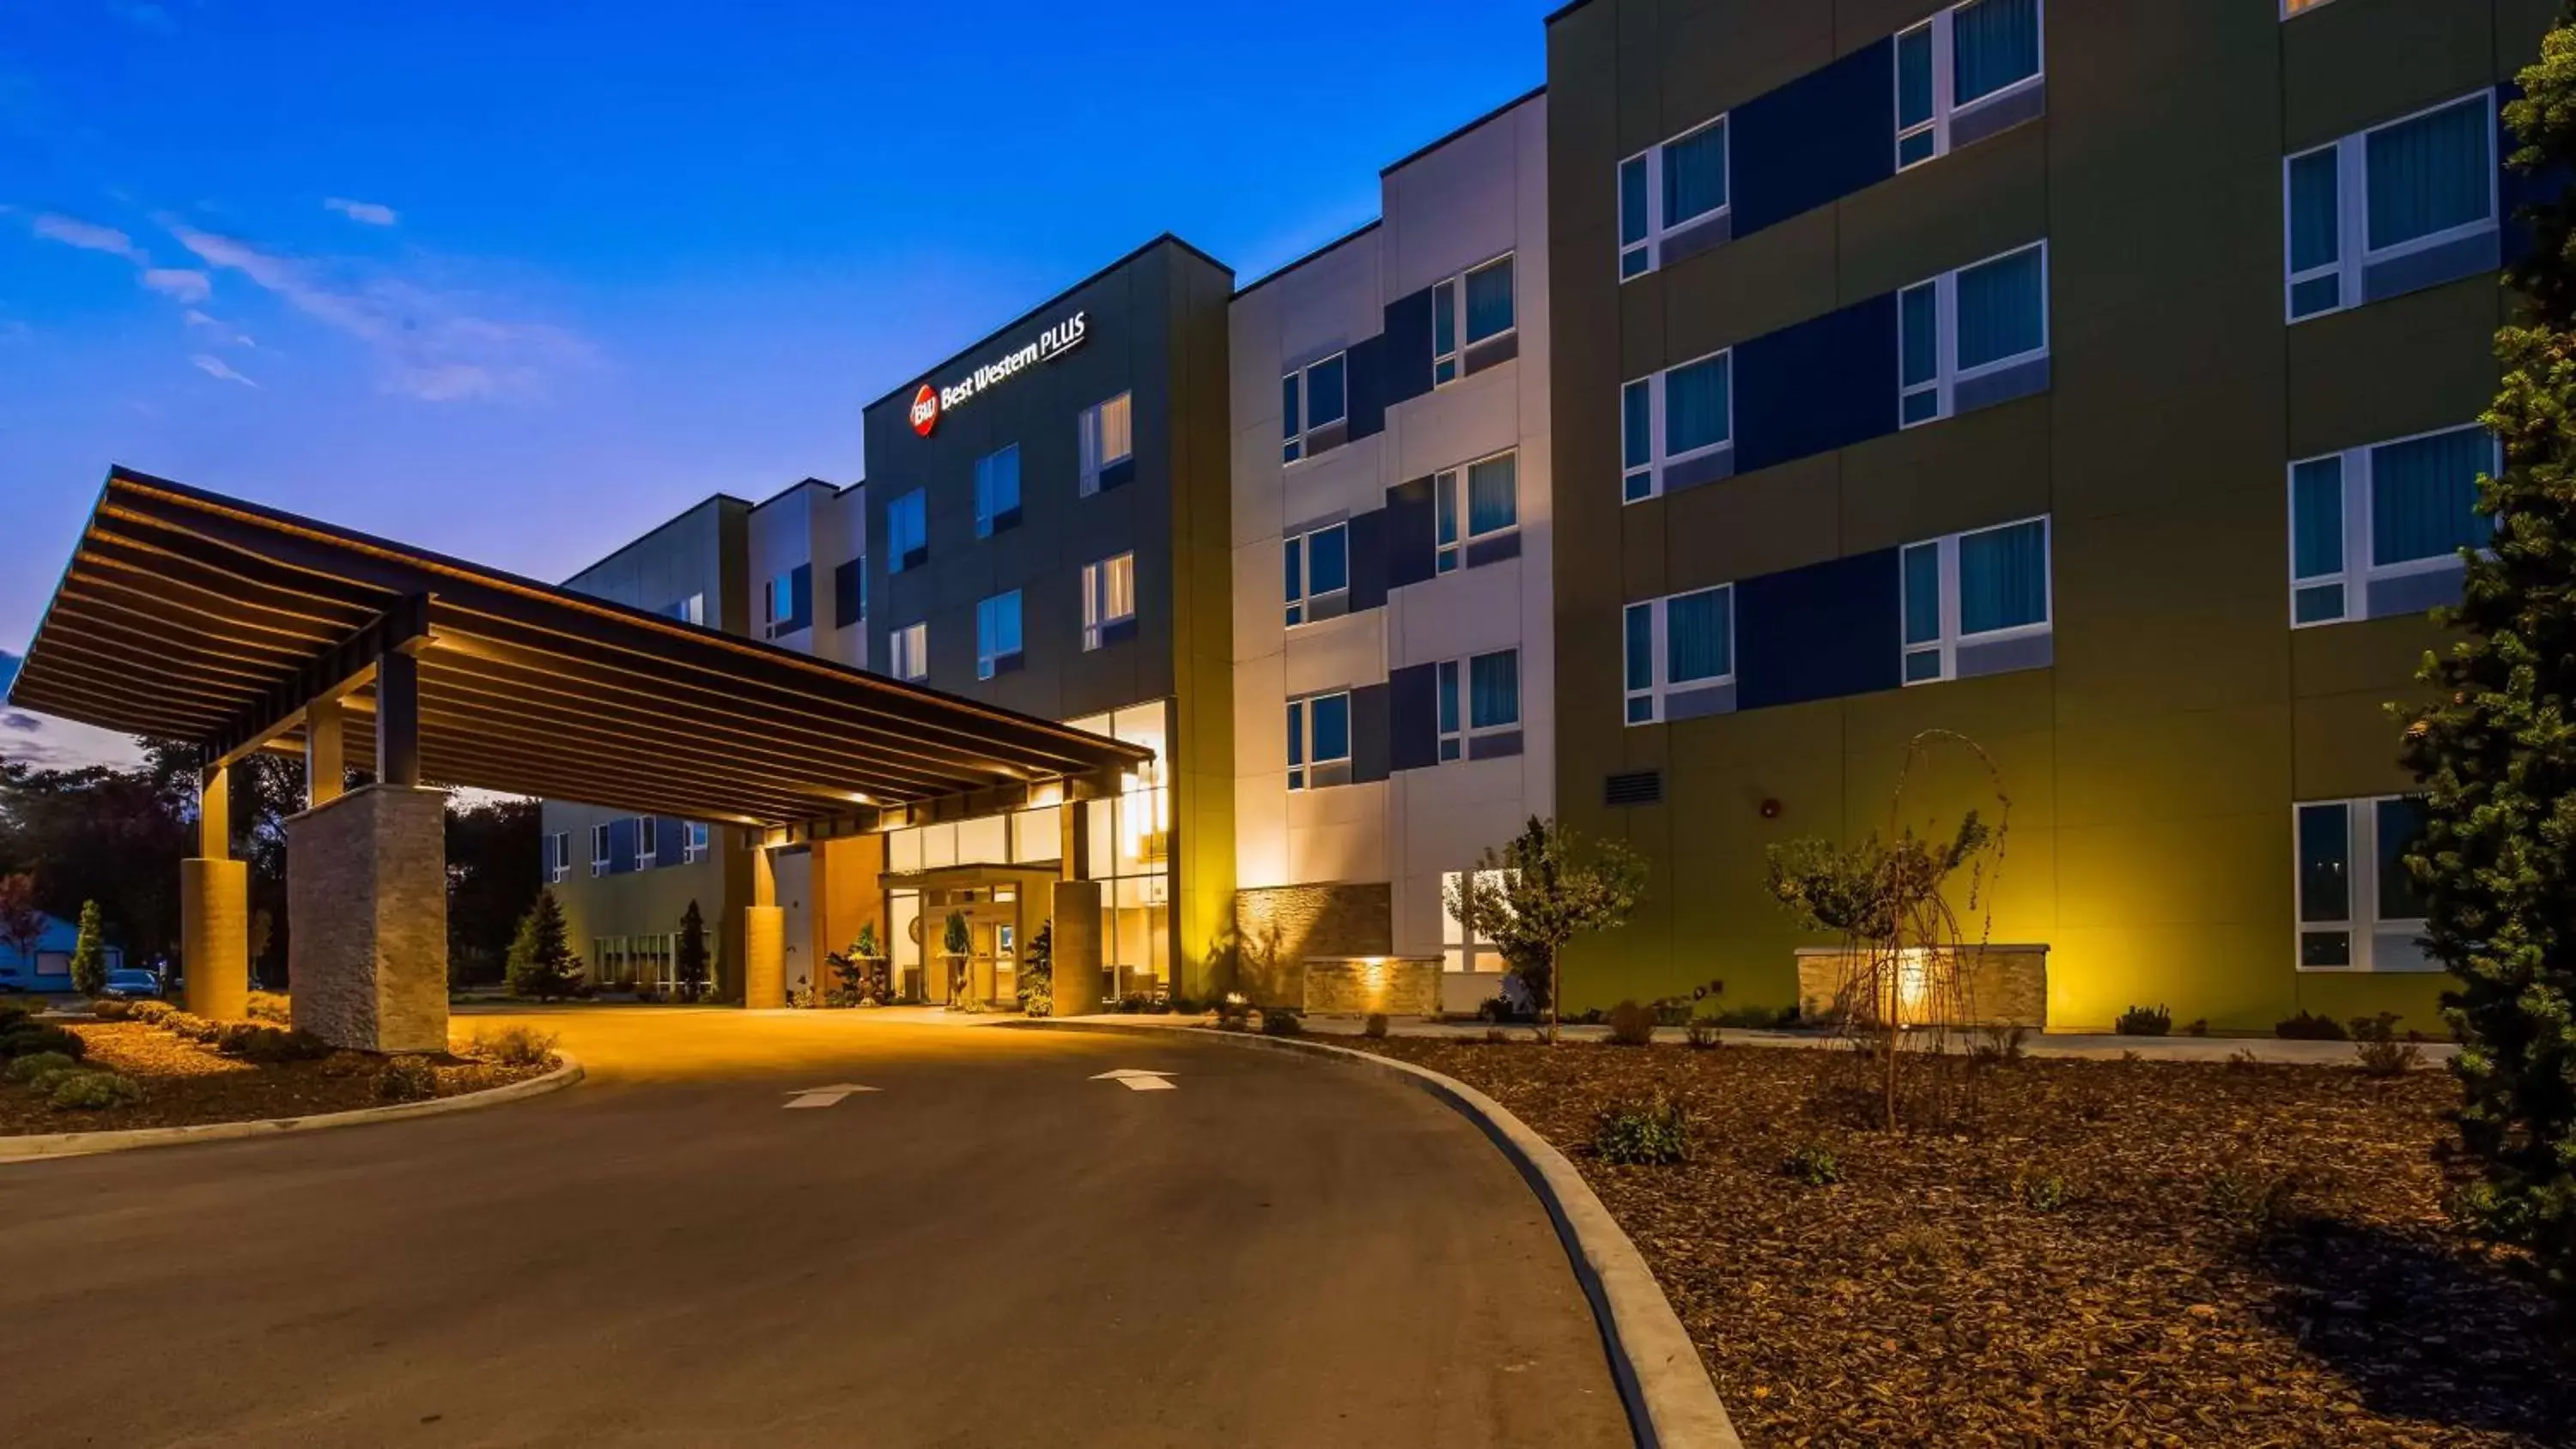 Property Building in Best Western Plus Peppertree Nampa Civic Center Inn